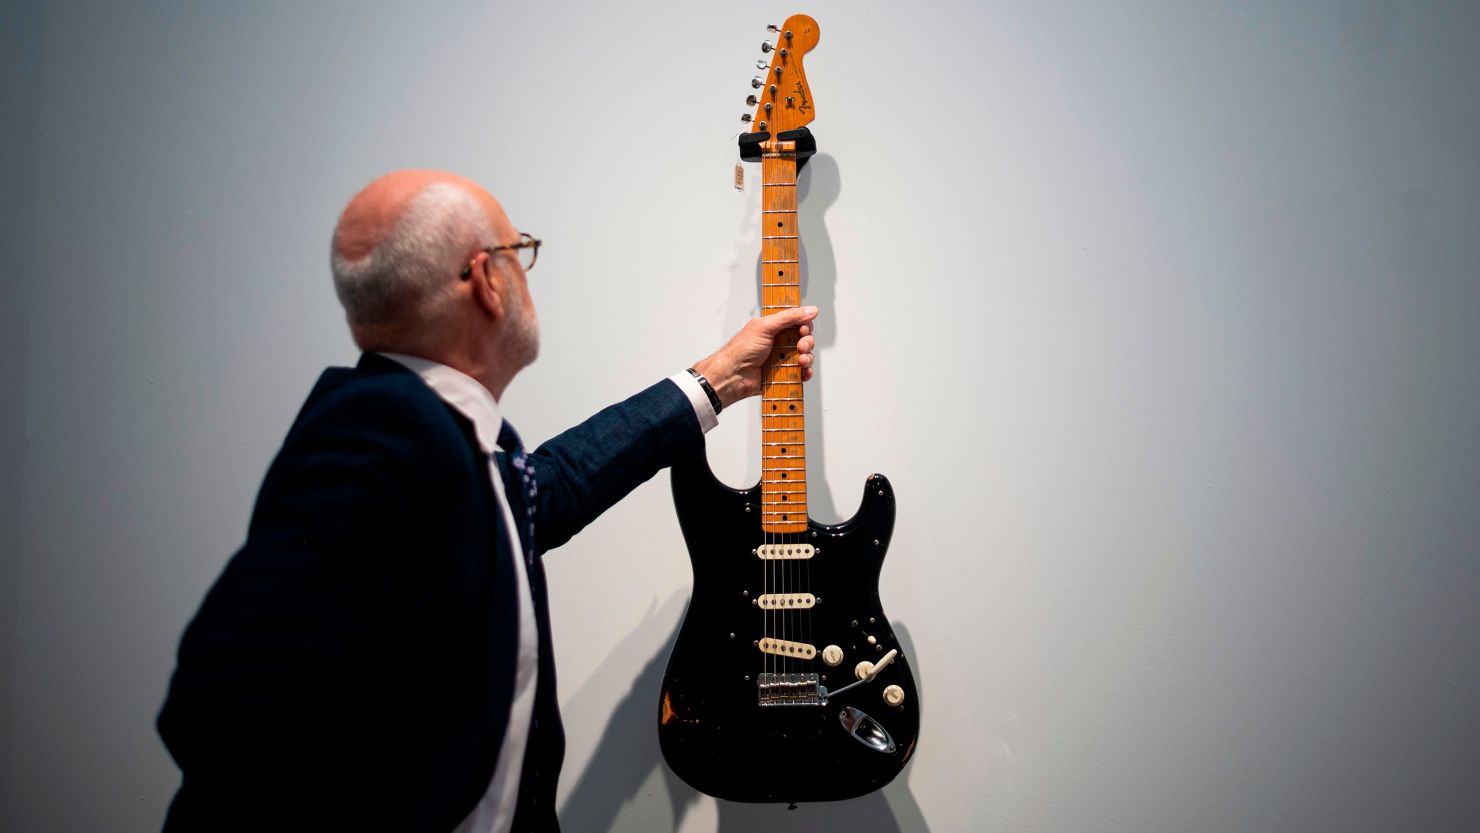 Kerry Keane, a musical instruments specialist for Christie's, holds Pink Floyd guitarist David Gilmour's 1969 Fender Stratocaster. Known as the "Black Strat," the guitar, which Gilmour used on some of the band's most famous recordings, auctioned for $3.9 million, a new record.